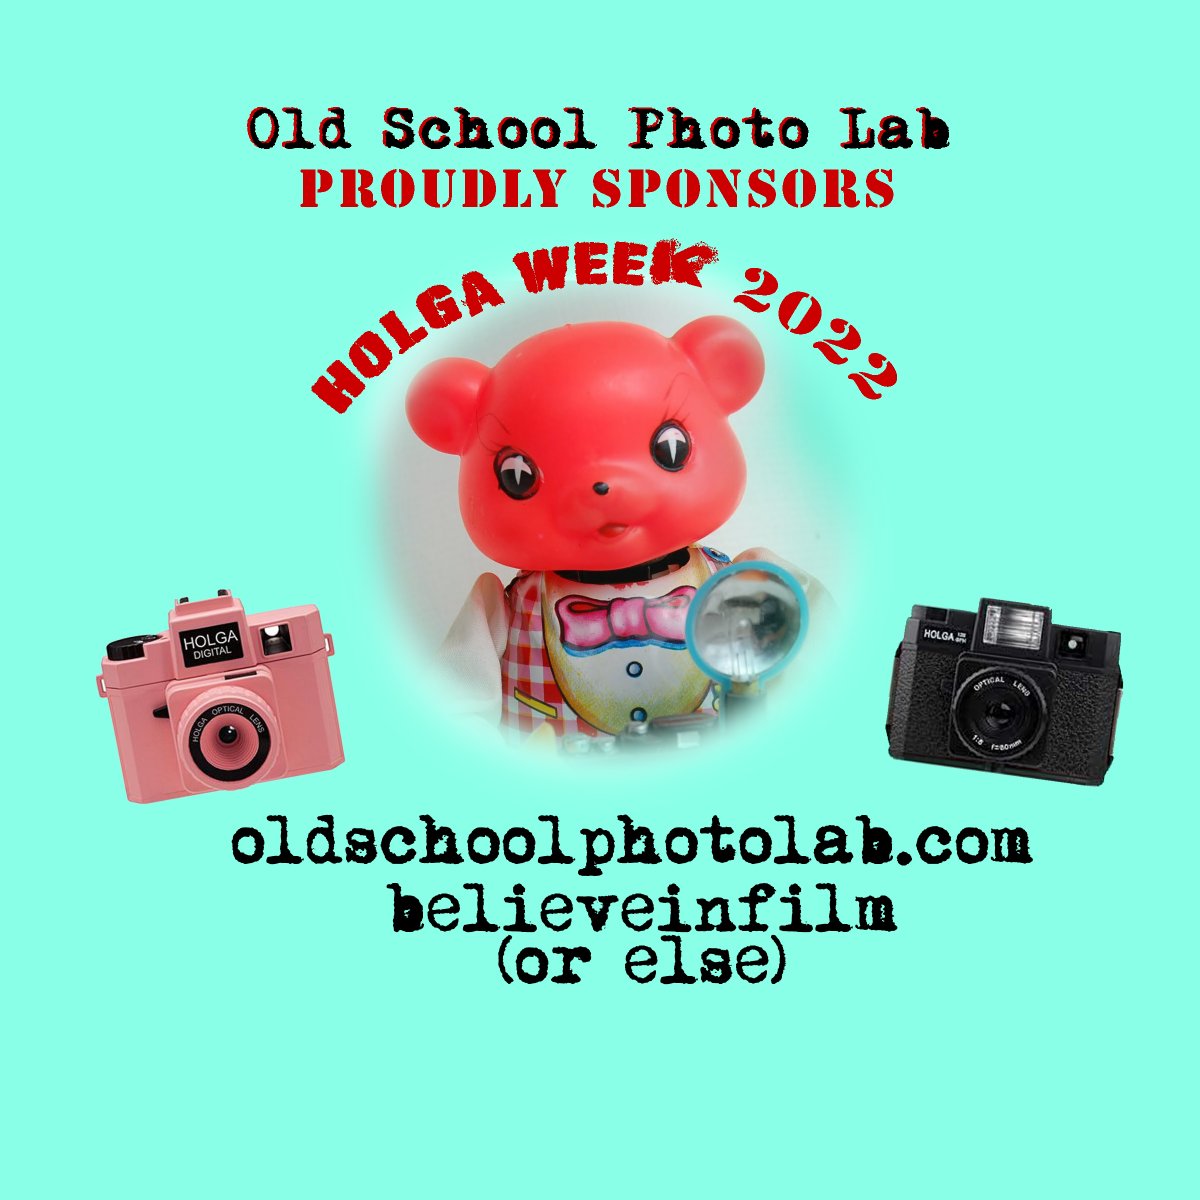 Enter to Win! Do you follow Holga week annually already!? If not & you shoot film, definitely head over to @holgaweek to learn what it’s all about! Then send in your Holga photos this week for a chance to win several prizes including one from us!